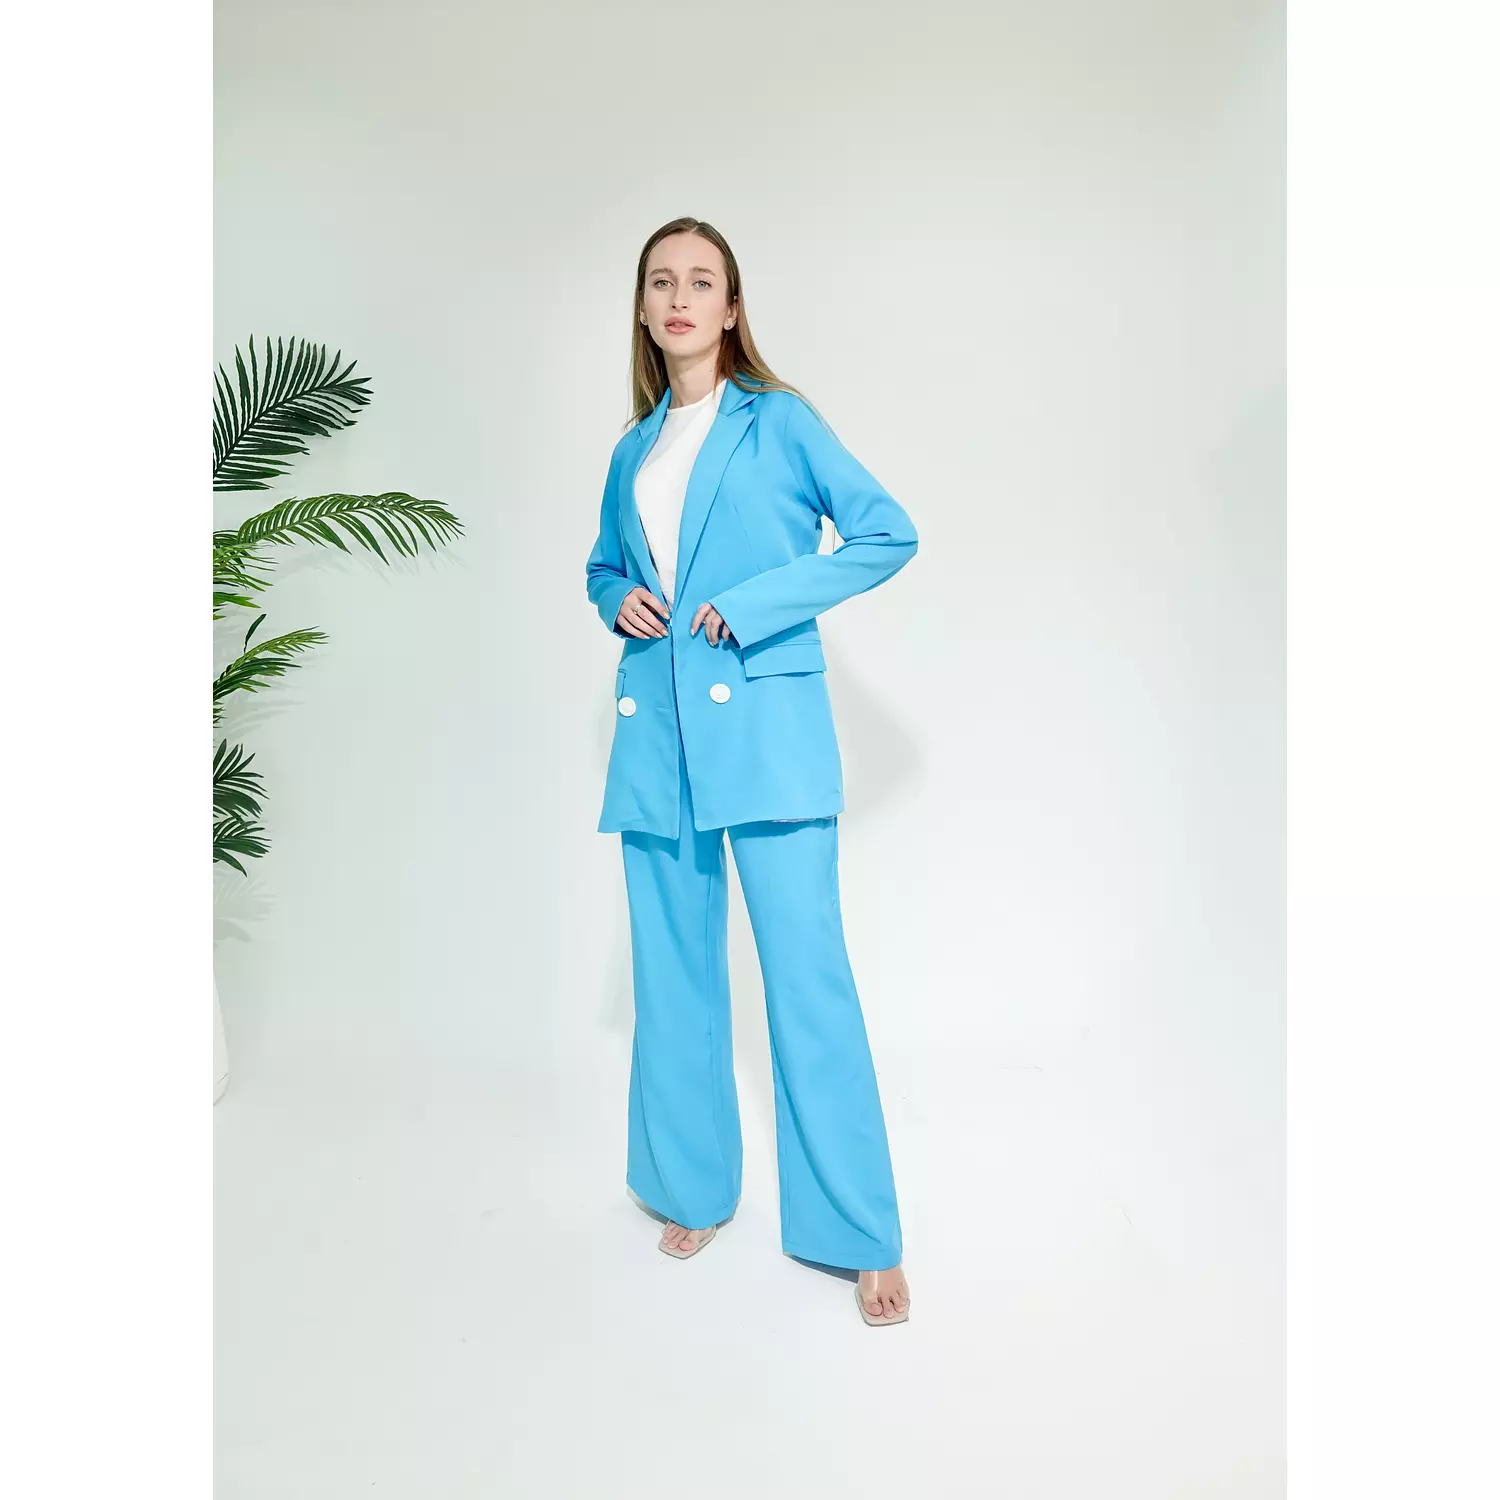 TURQUOISE SUIT 6